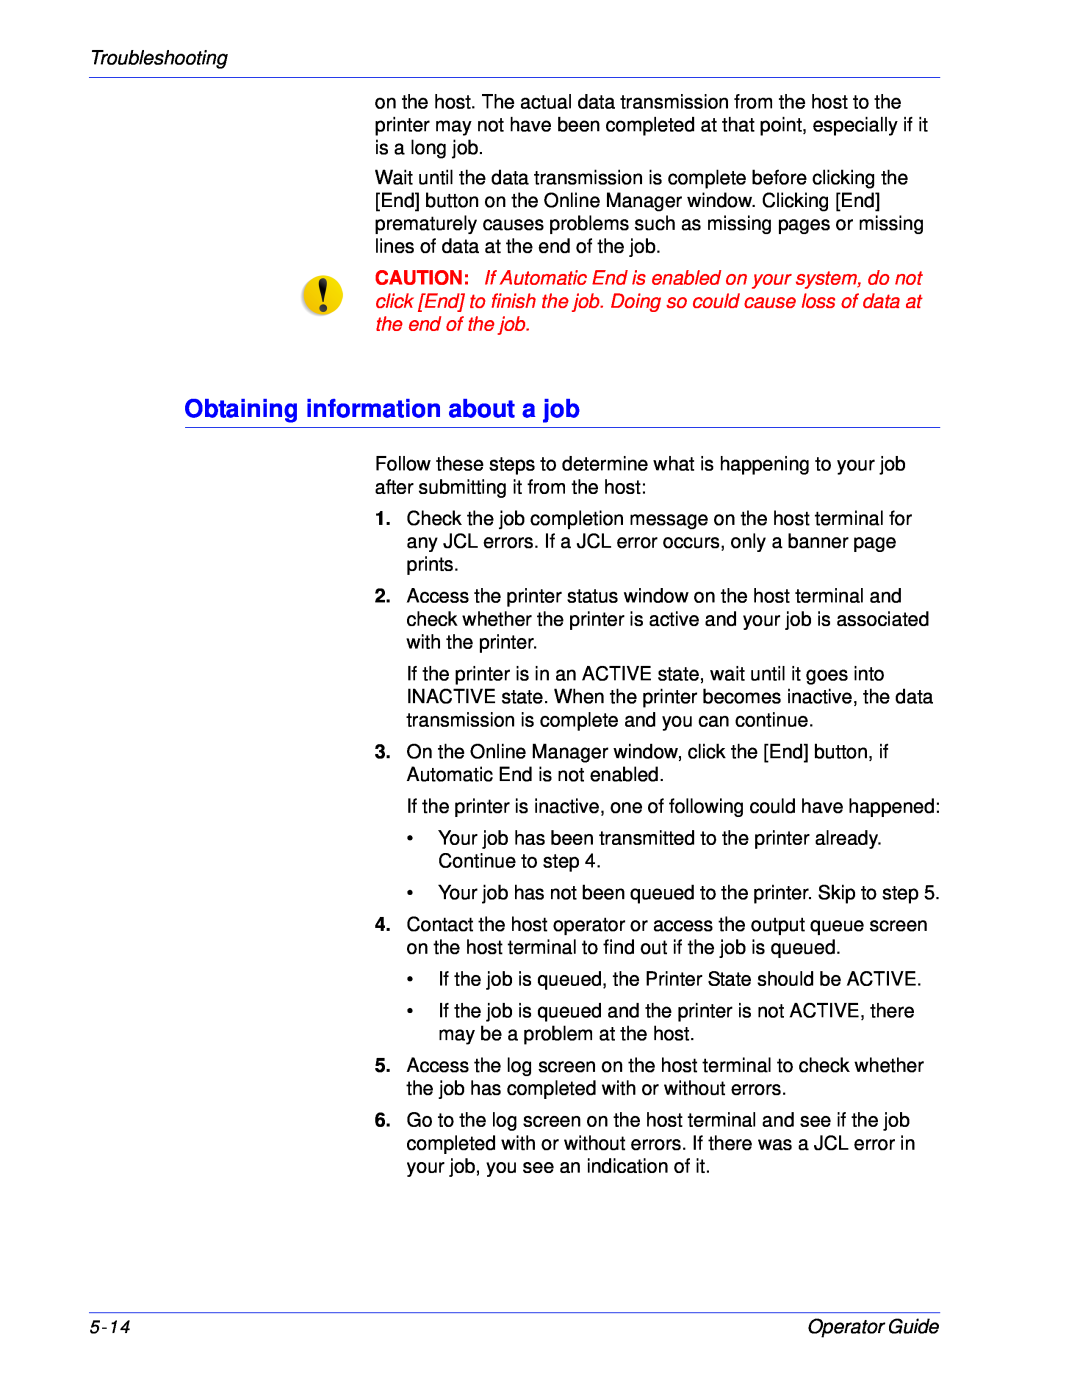 Xerox 100, 180 EPS manual Obtaining information about a job, Troubleshooting 